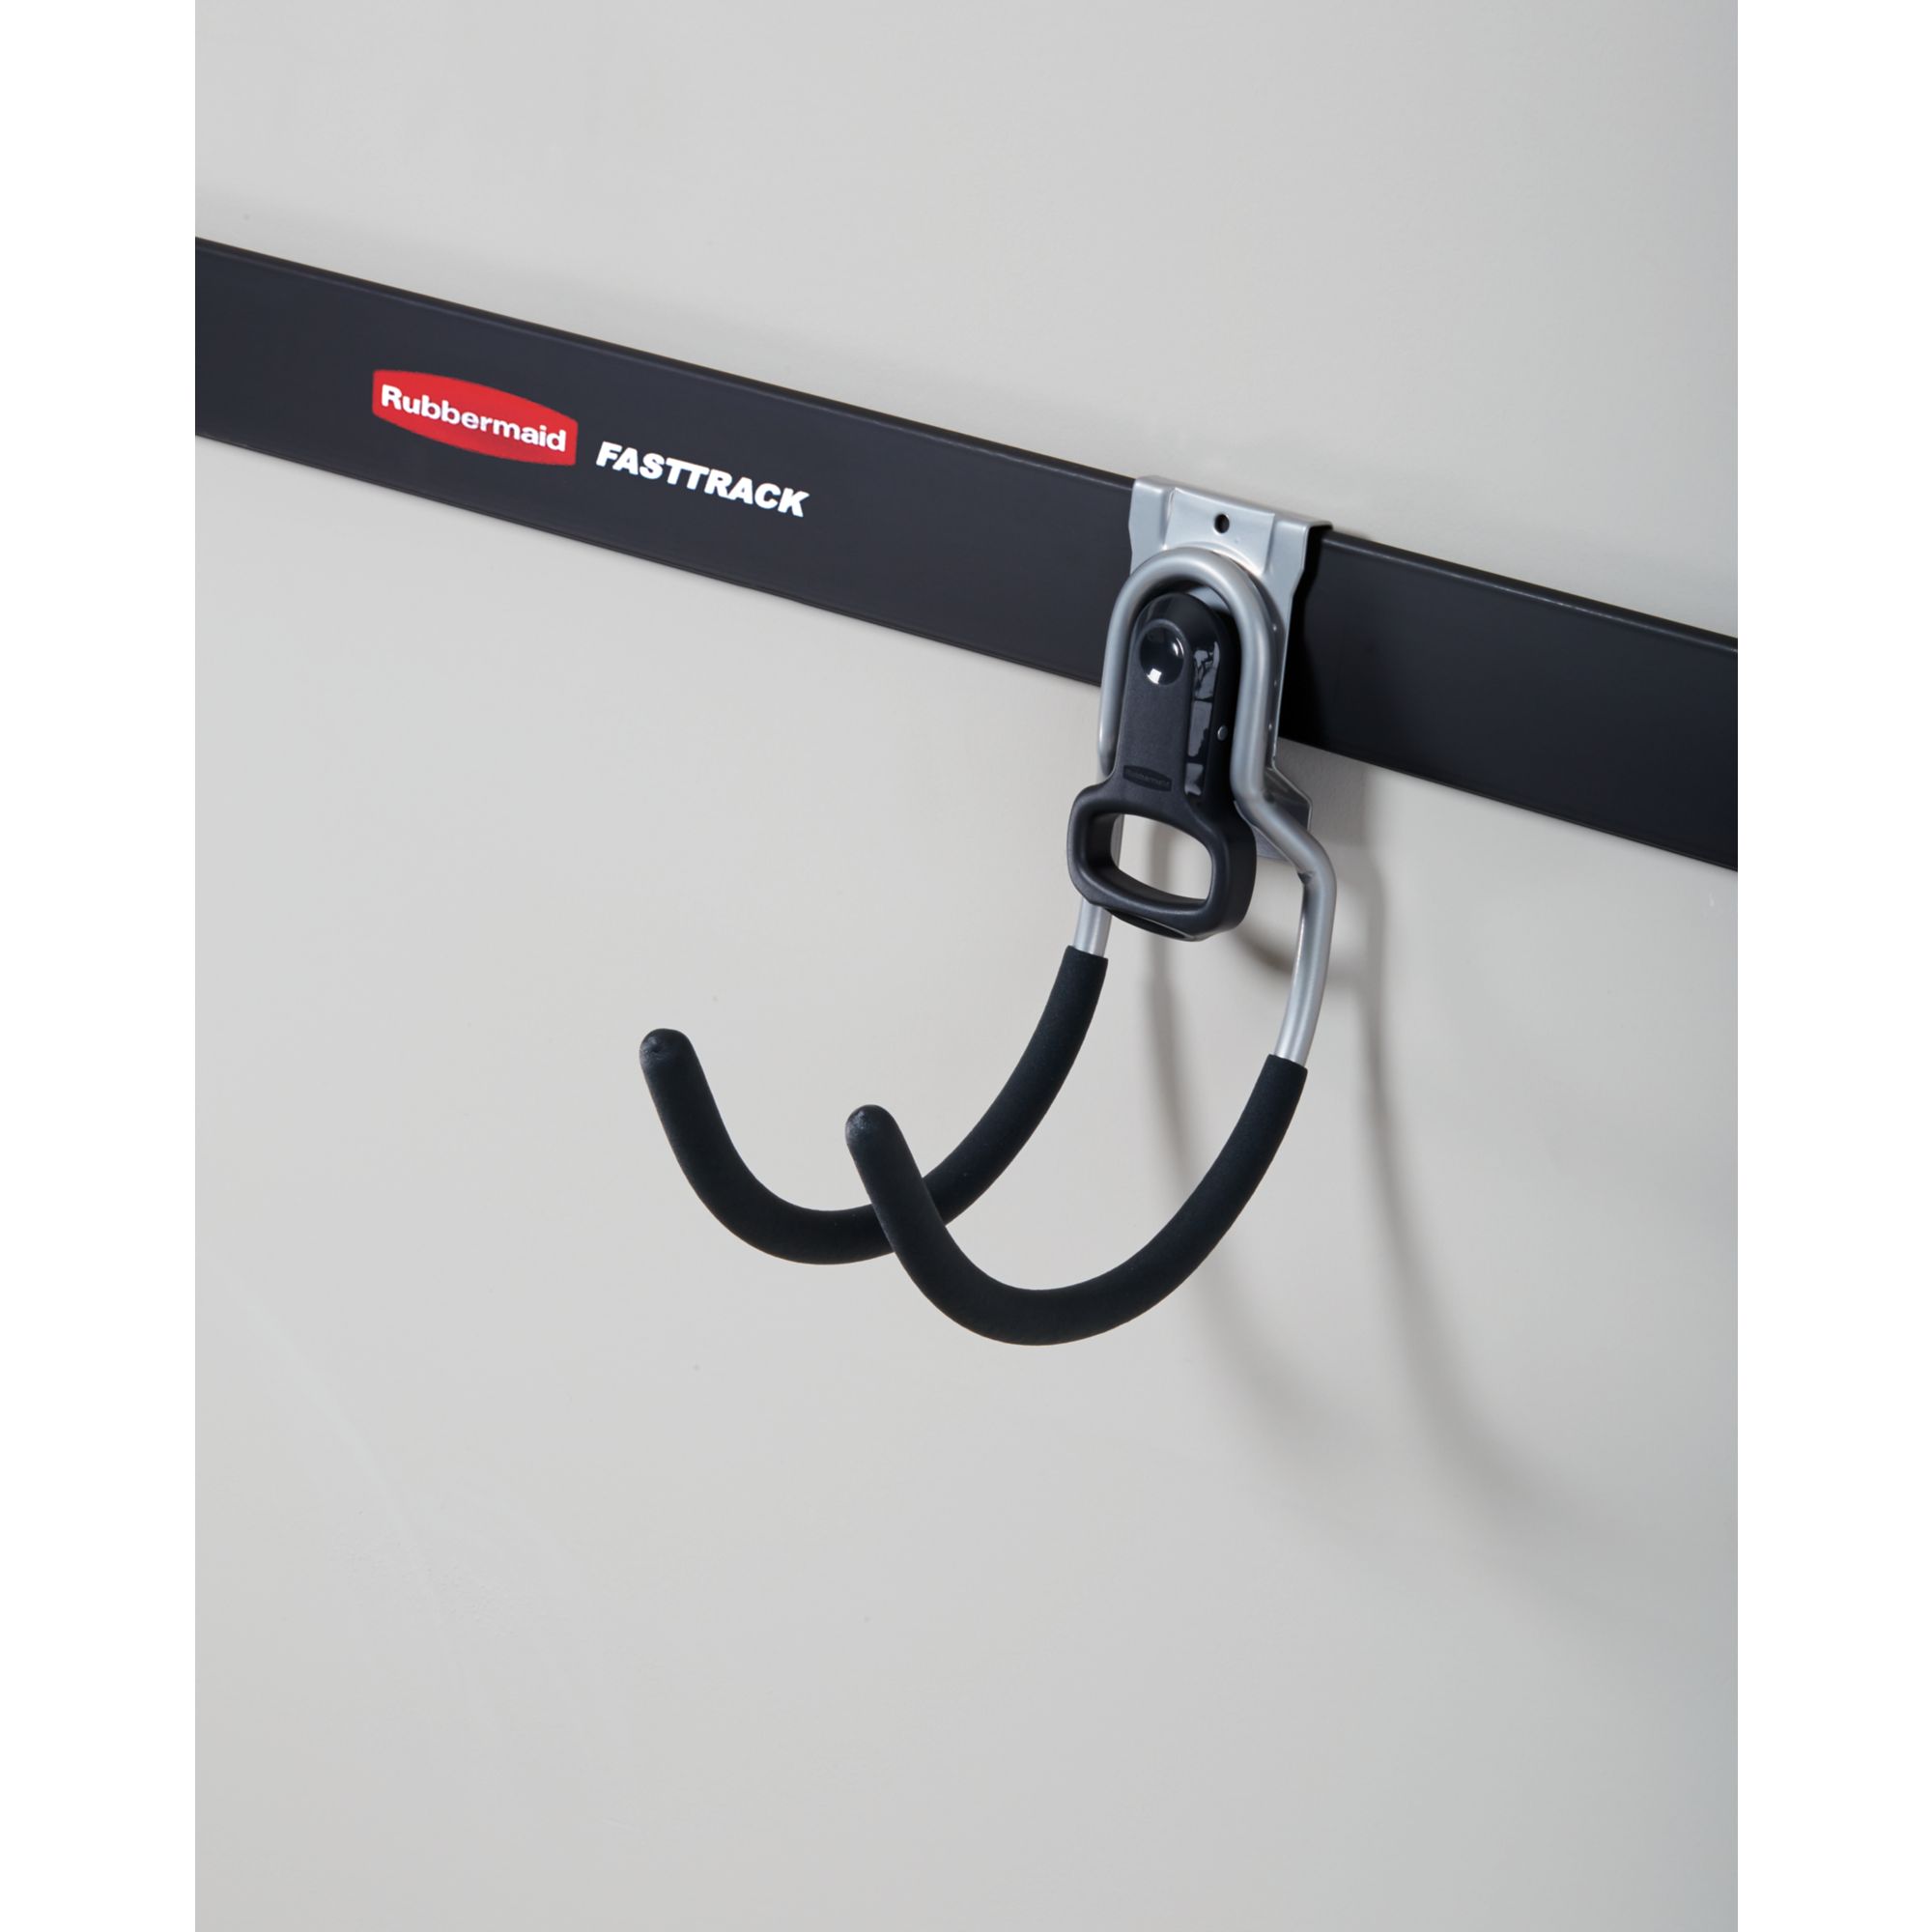 Rubbermaid 1784459 Fast Track Wall Mounted Garage Storage Utility Multi  Purpose Hook for Tools, Sports Equipment, and Gardening Supplies, Satin  Nickel